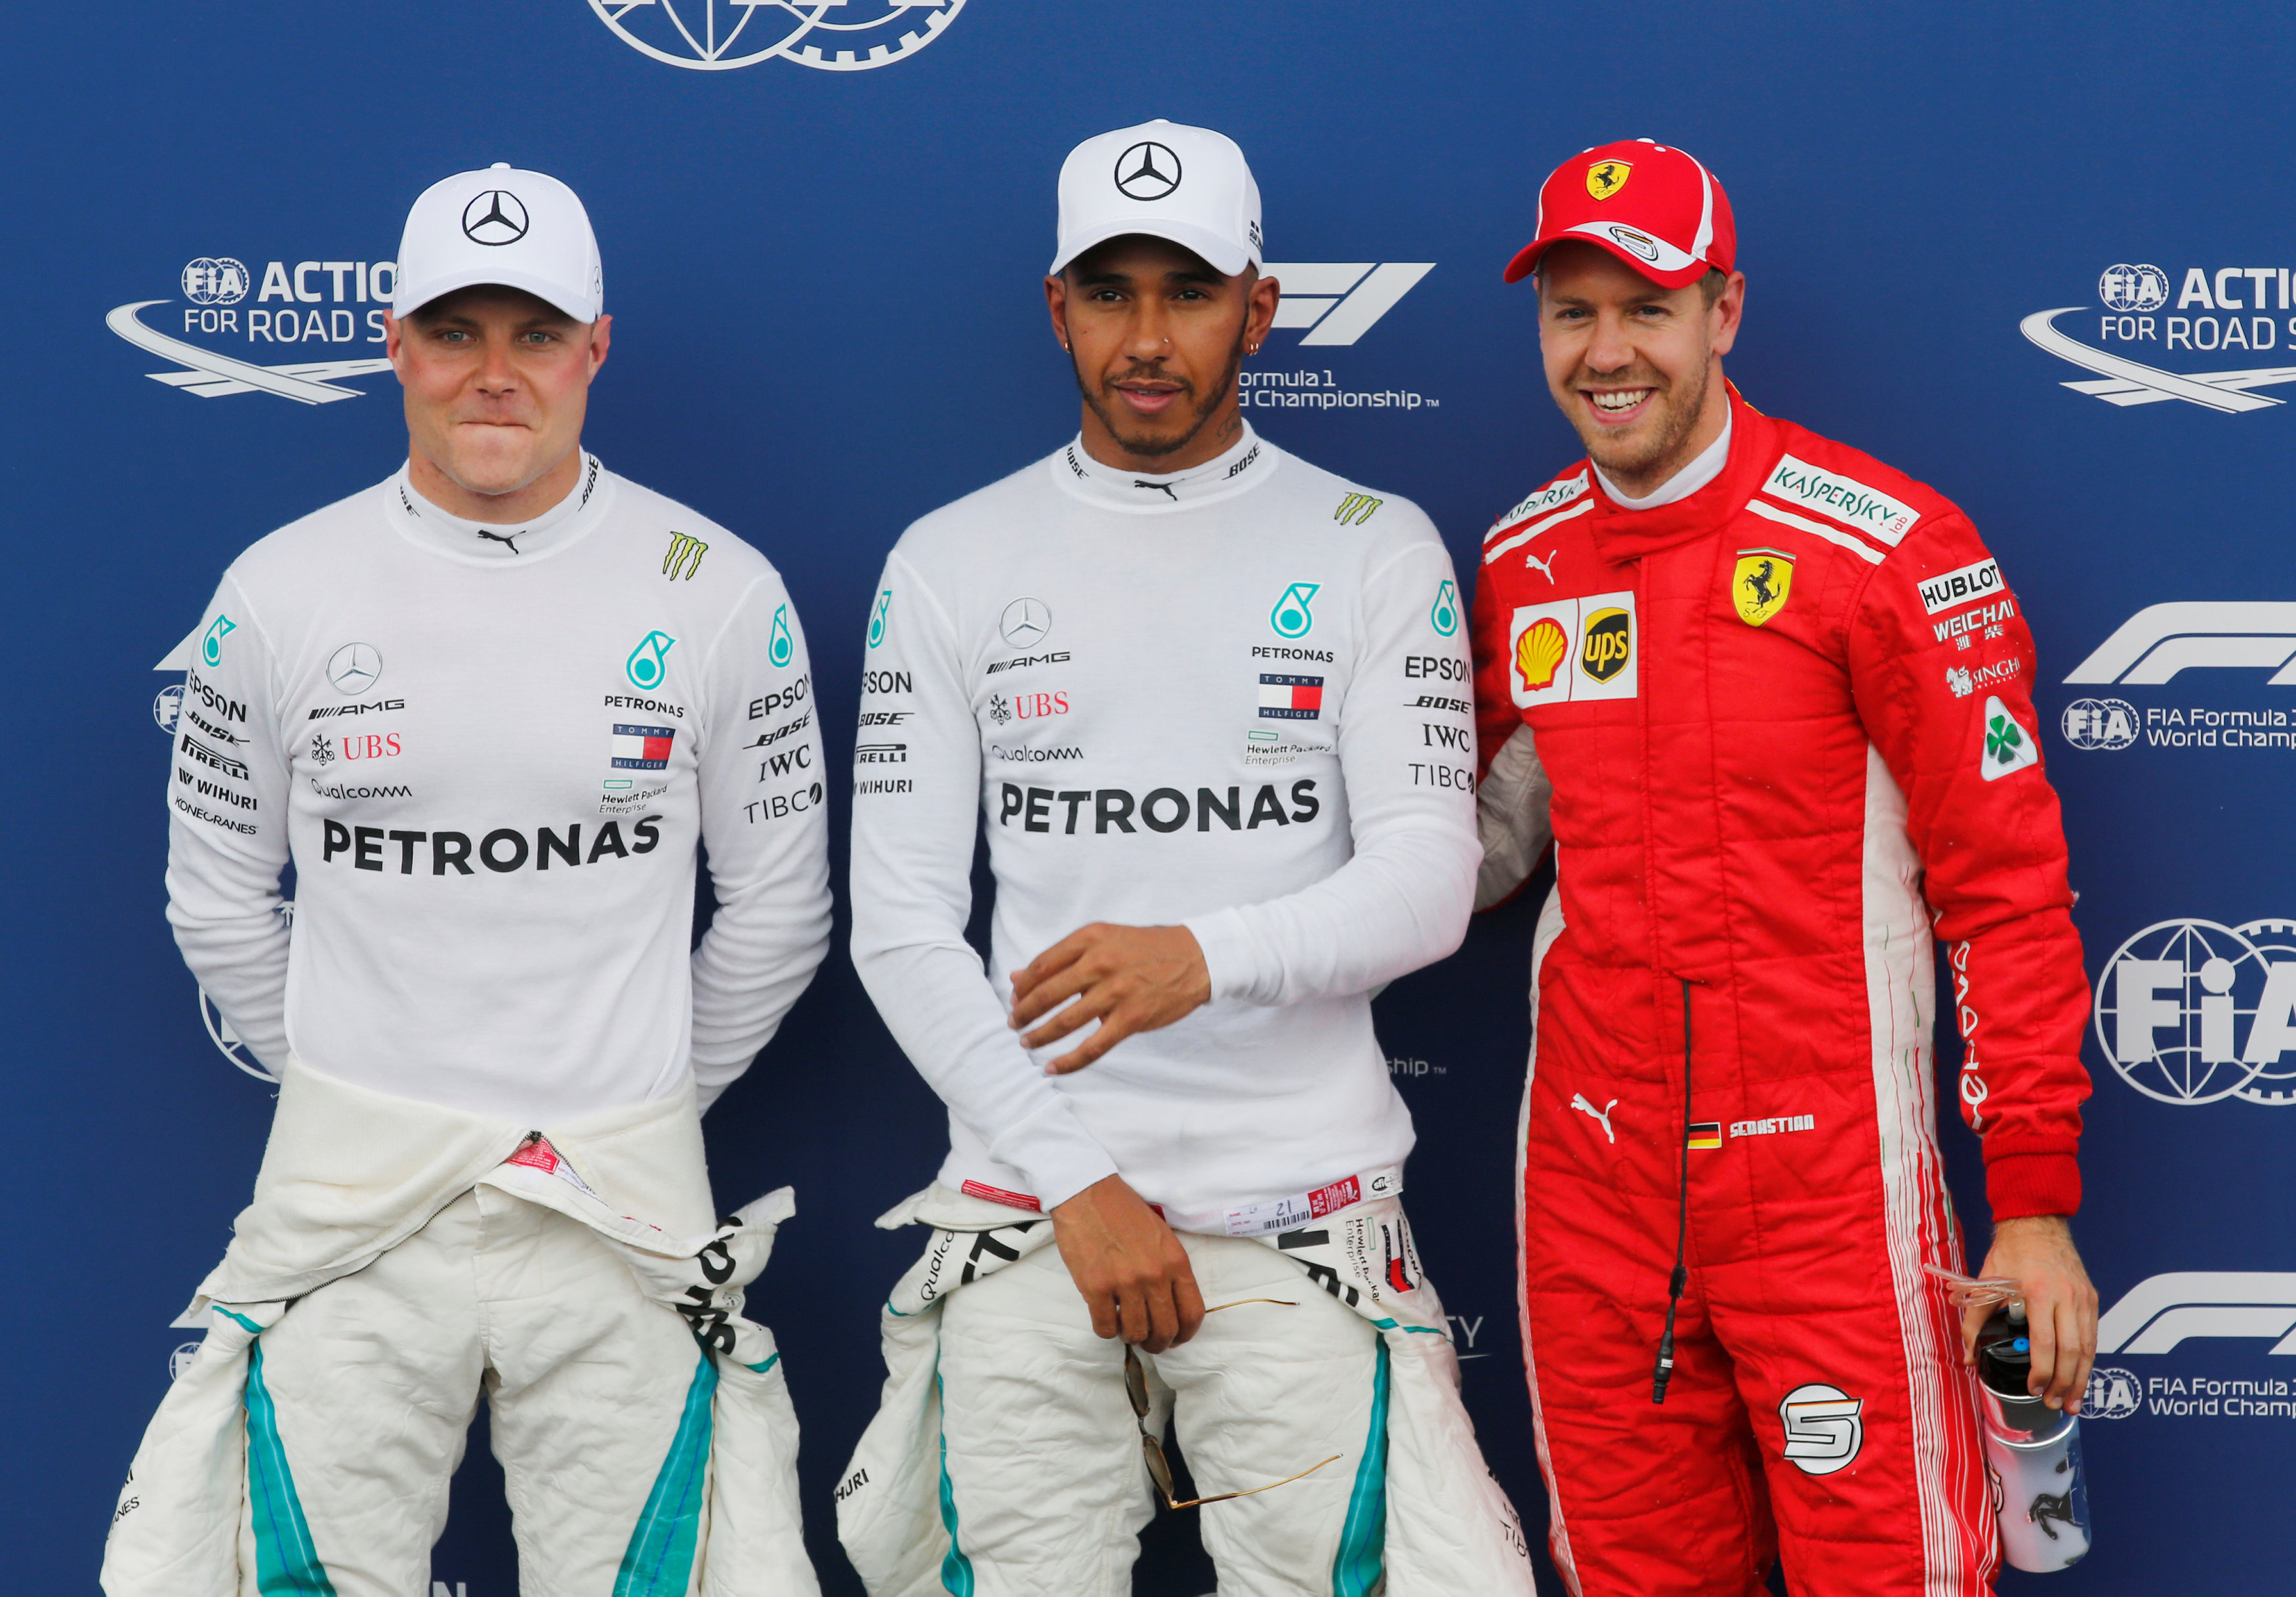 Motor Racing: Hamilton on pole in France with Vettel third